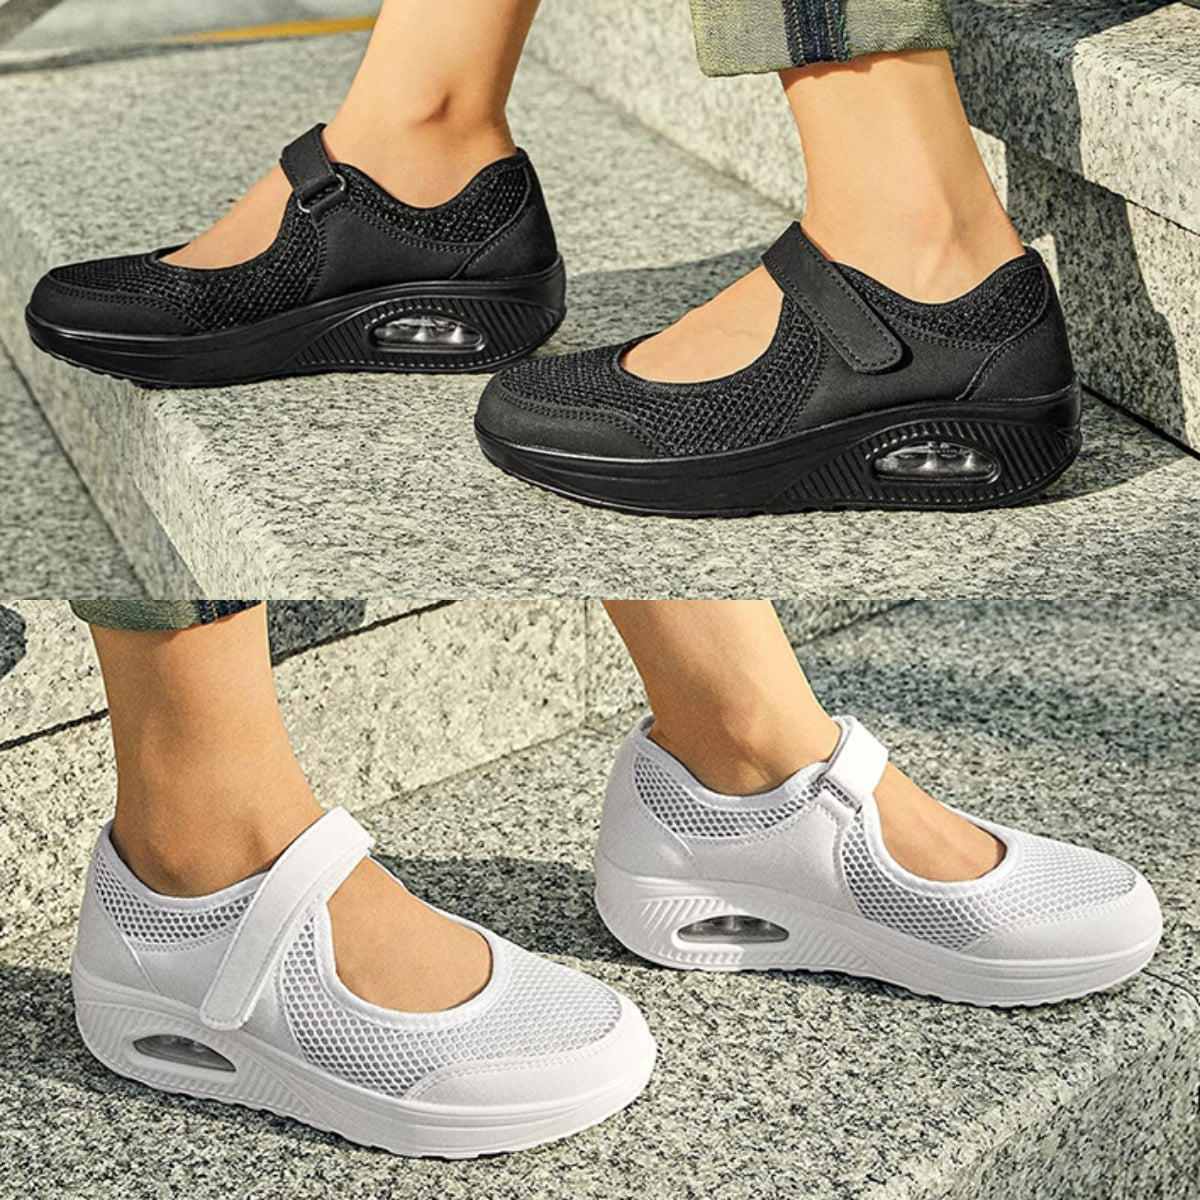 Colorsty Stress-Free Casual Shoes